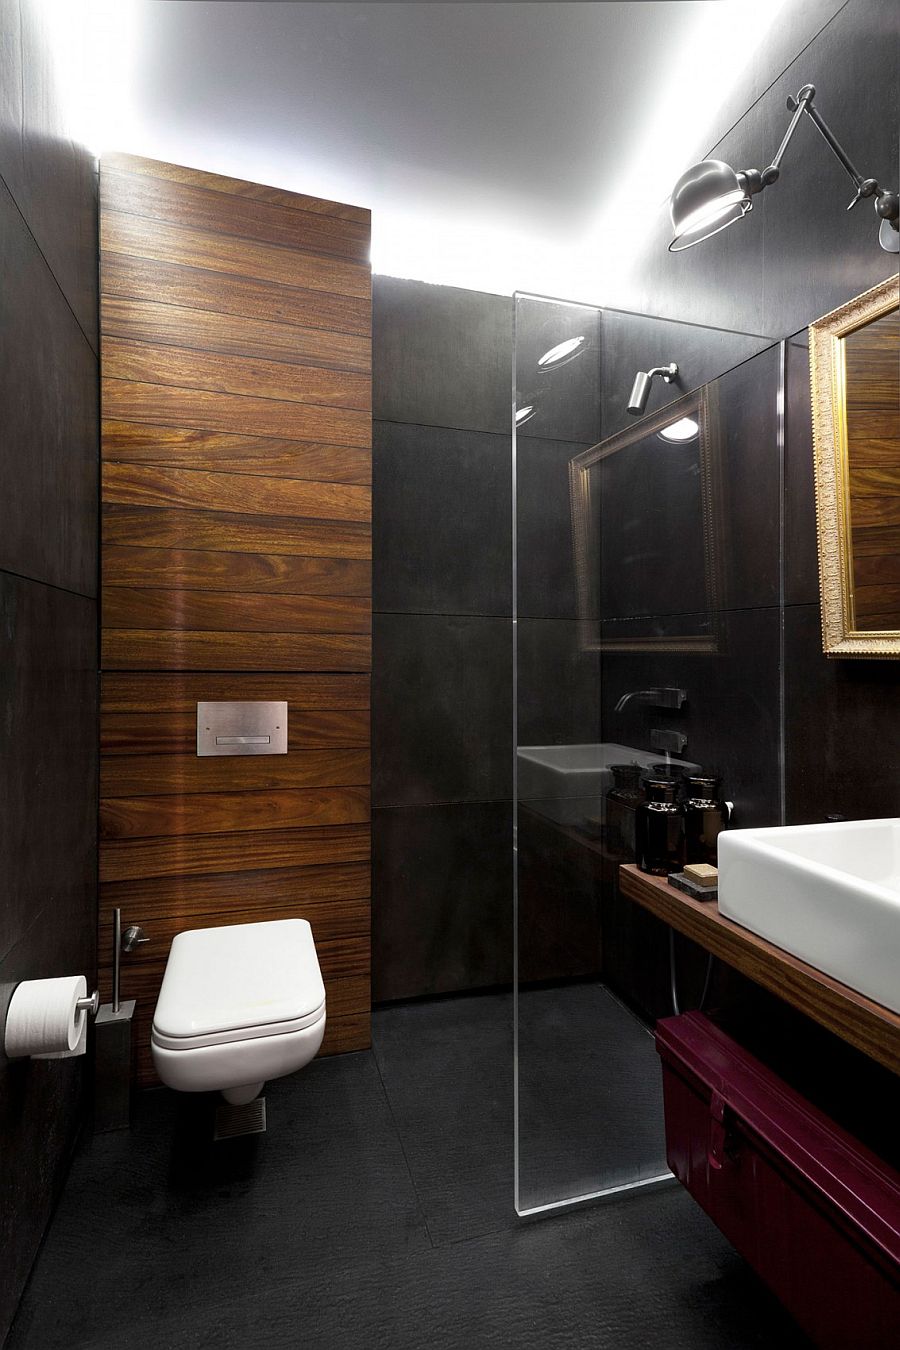 Dark concrete panels give the bathroom a moody, elegant appeal